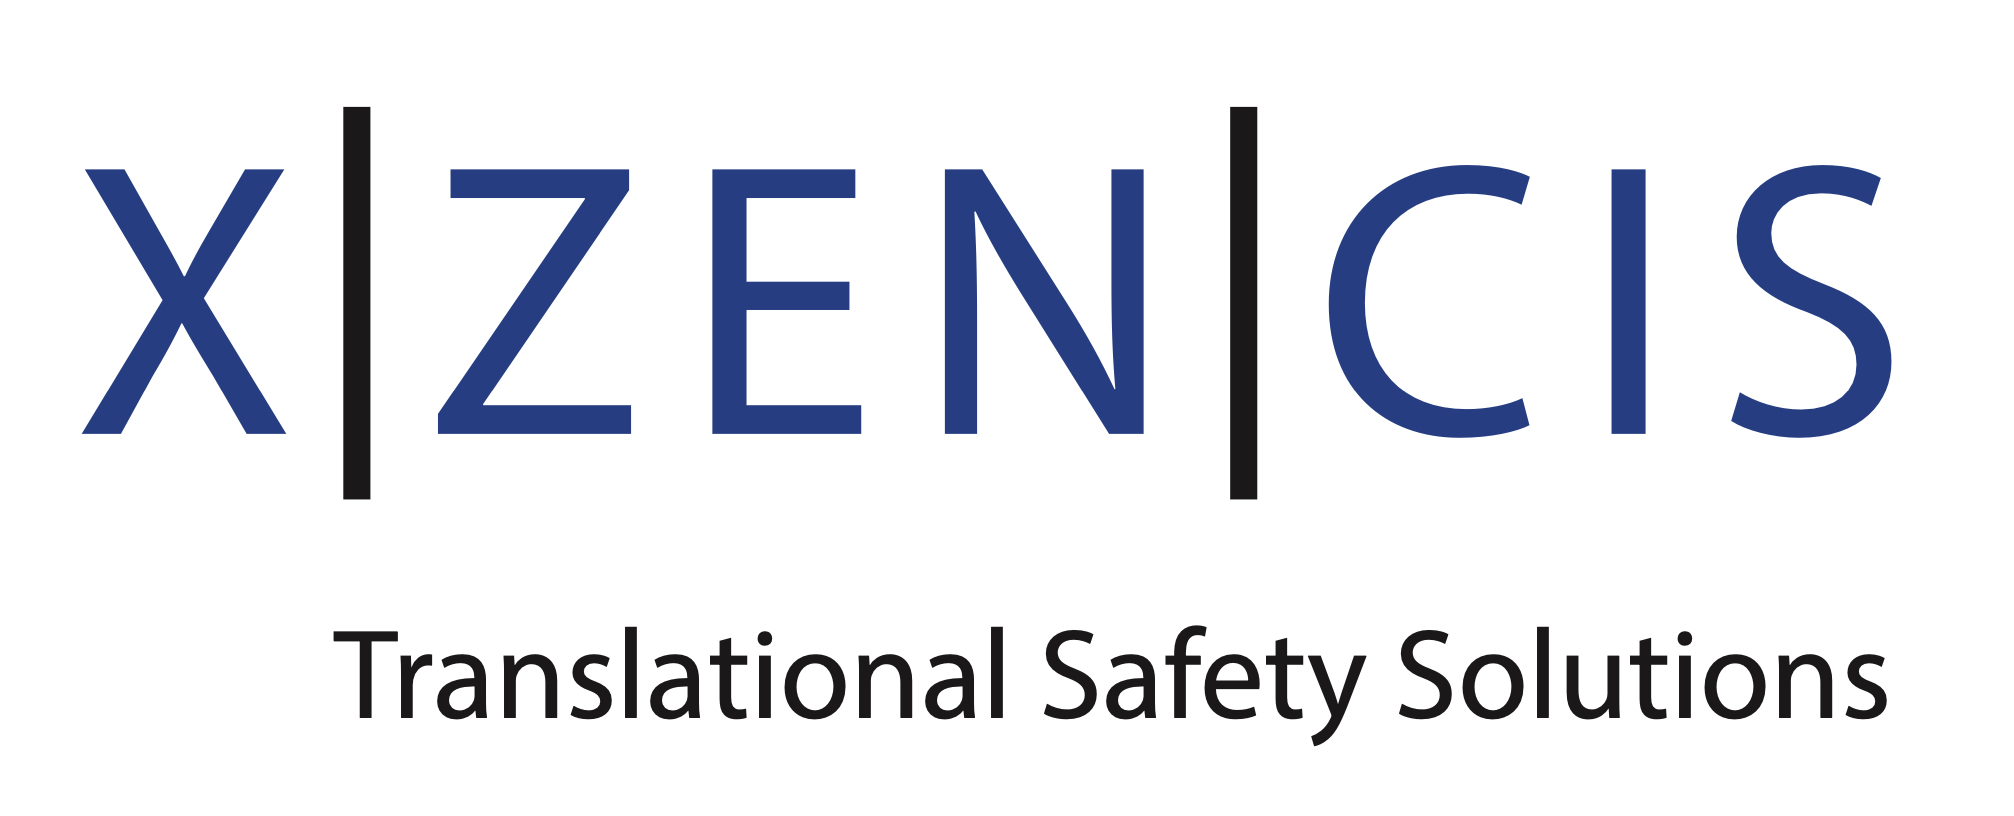 Xzencis support for Clinical Trial Hold and Crisis Management